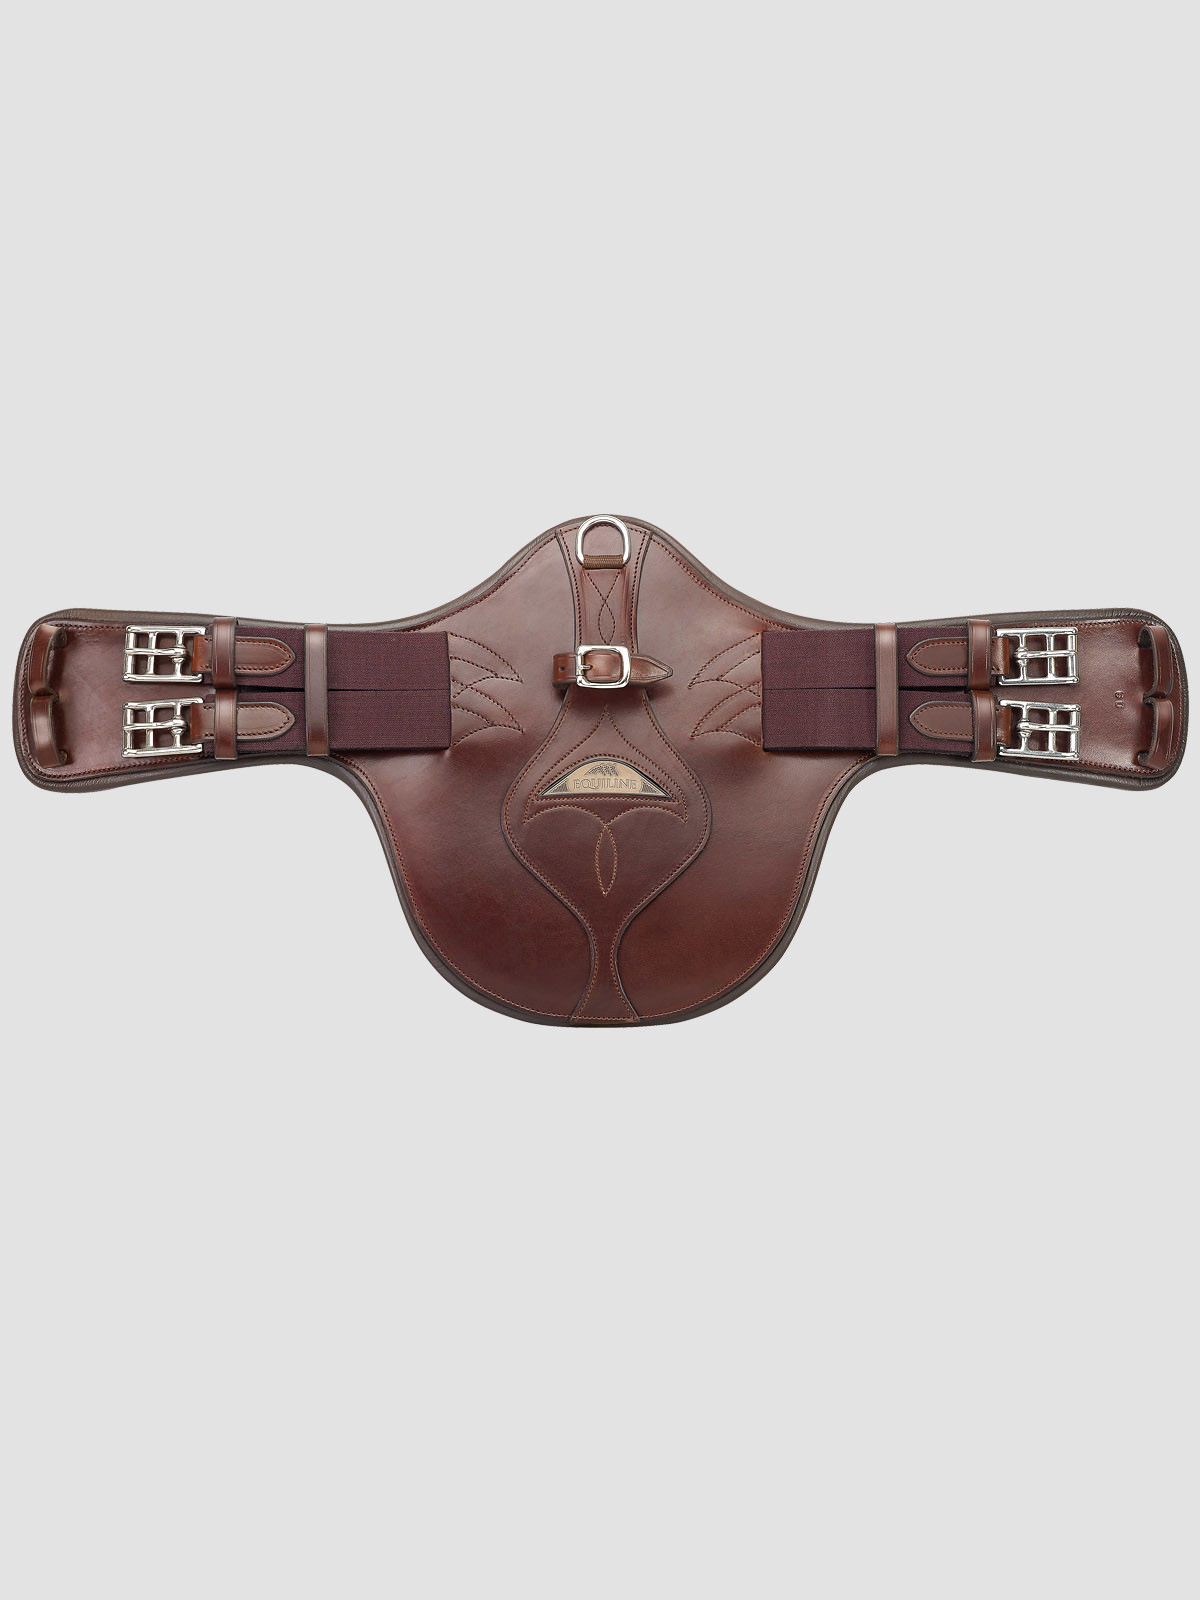 Brown equiline monoflap belly guard girth